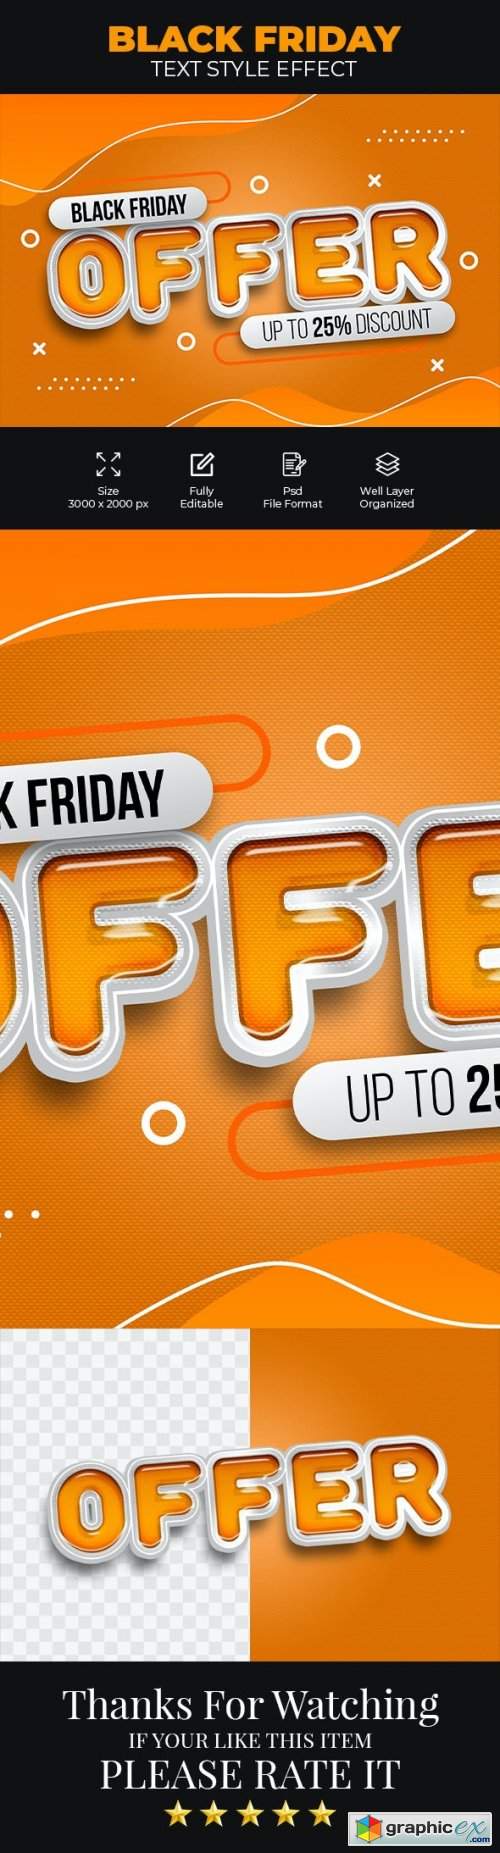 Black Friday Offer Psd Text Style Effect 